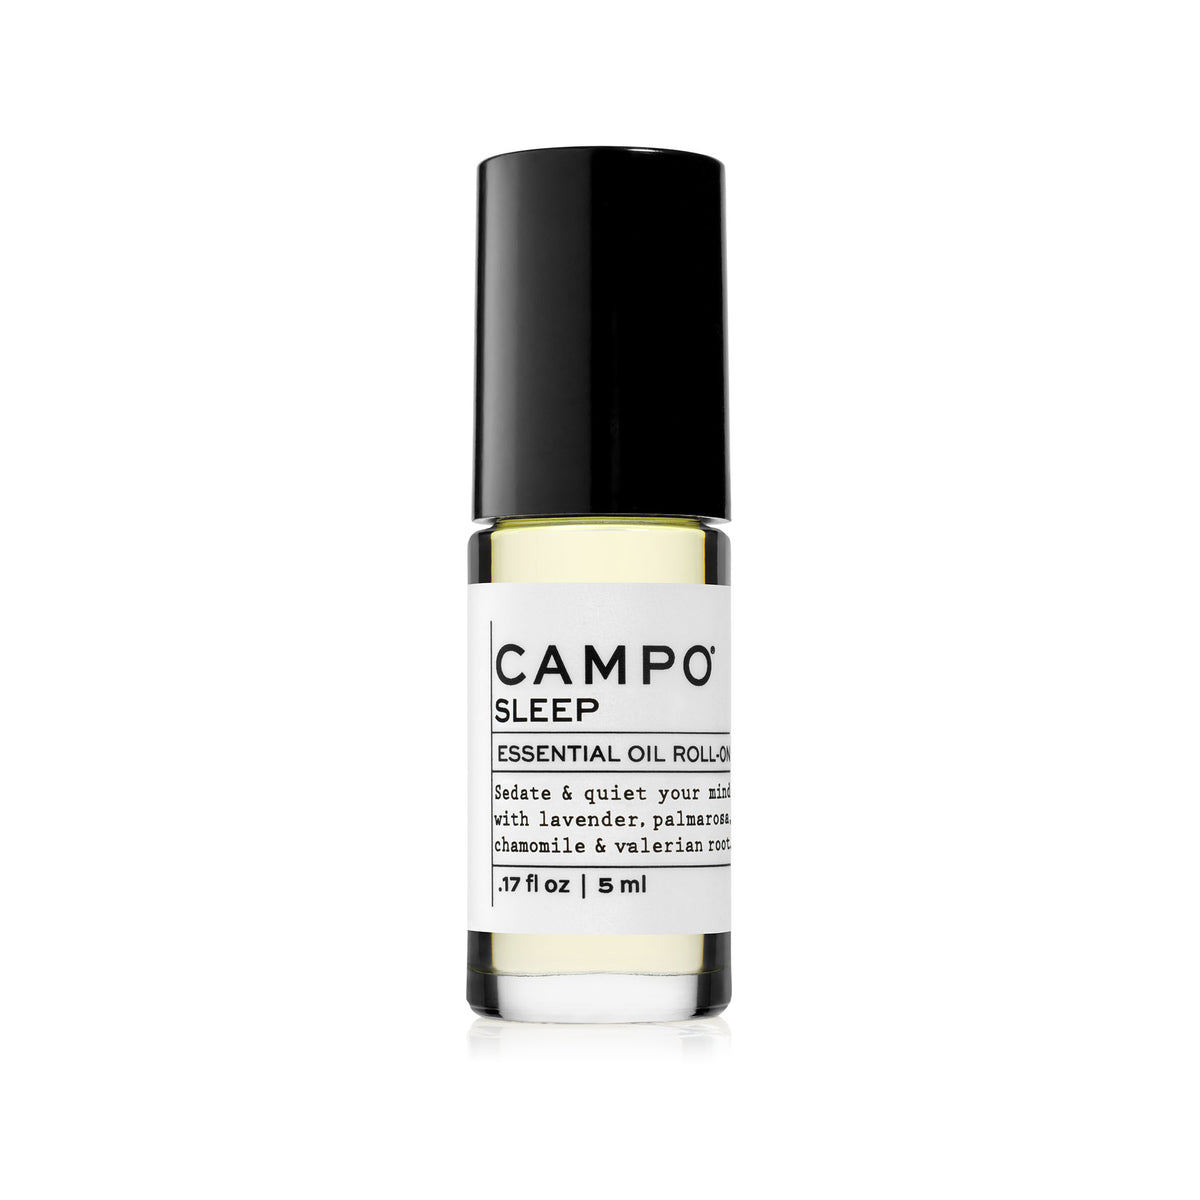 Campo Beauty Essential Oil SLEEP Stretch Mark Relief Blend Roll-On that in 5 ml. Soothe sore muscles and pain. Sedate &amp; quiet your mind. Fall into a deep sleep with this 100% natural essential oil roll-on blend of French Lavender, Palmarosa, Roman Chamomile, and Valerian Root.